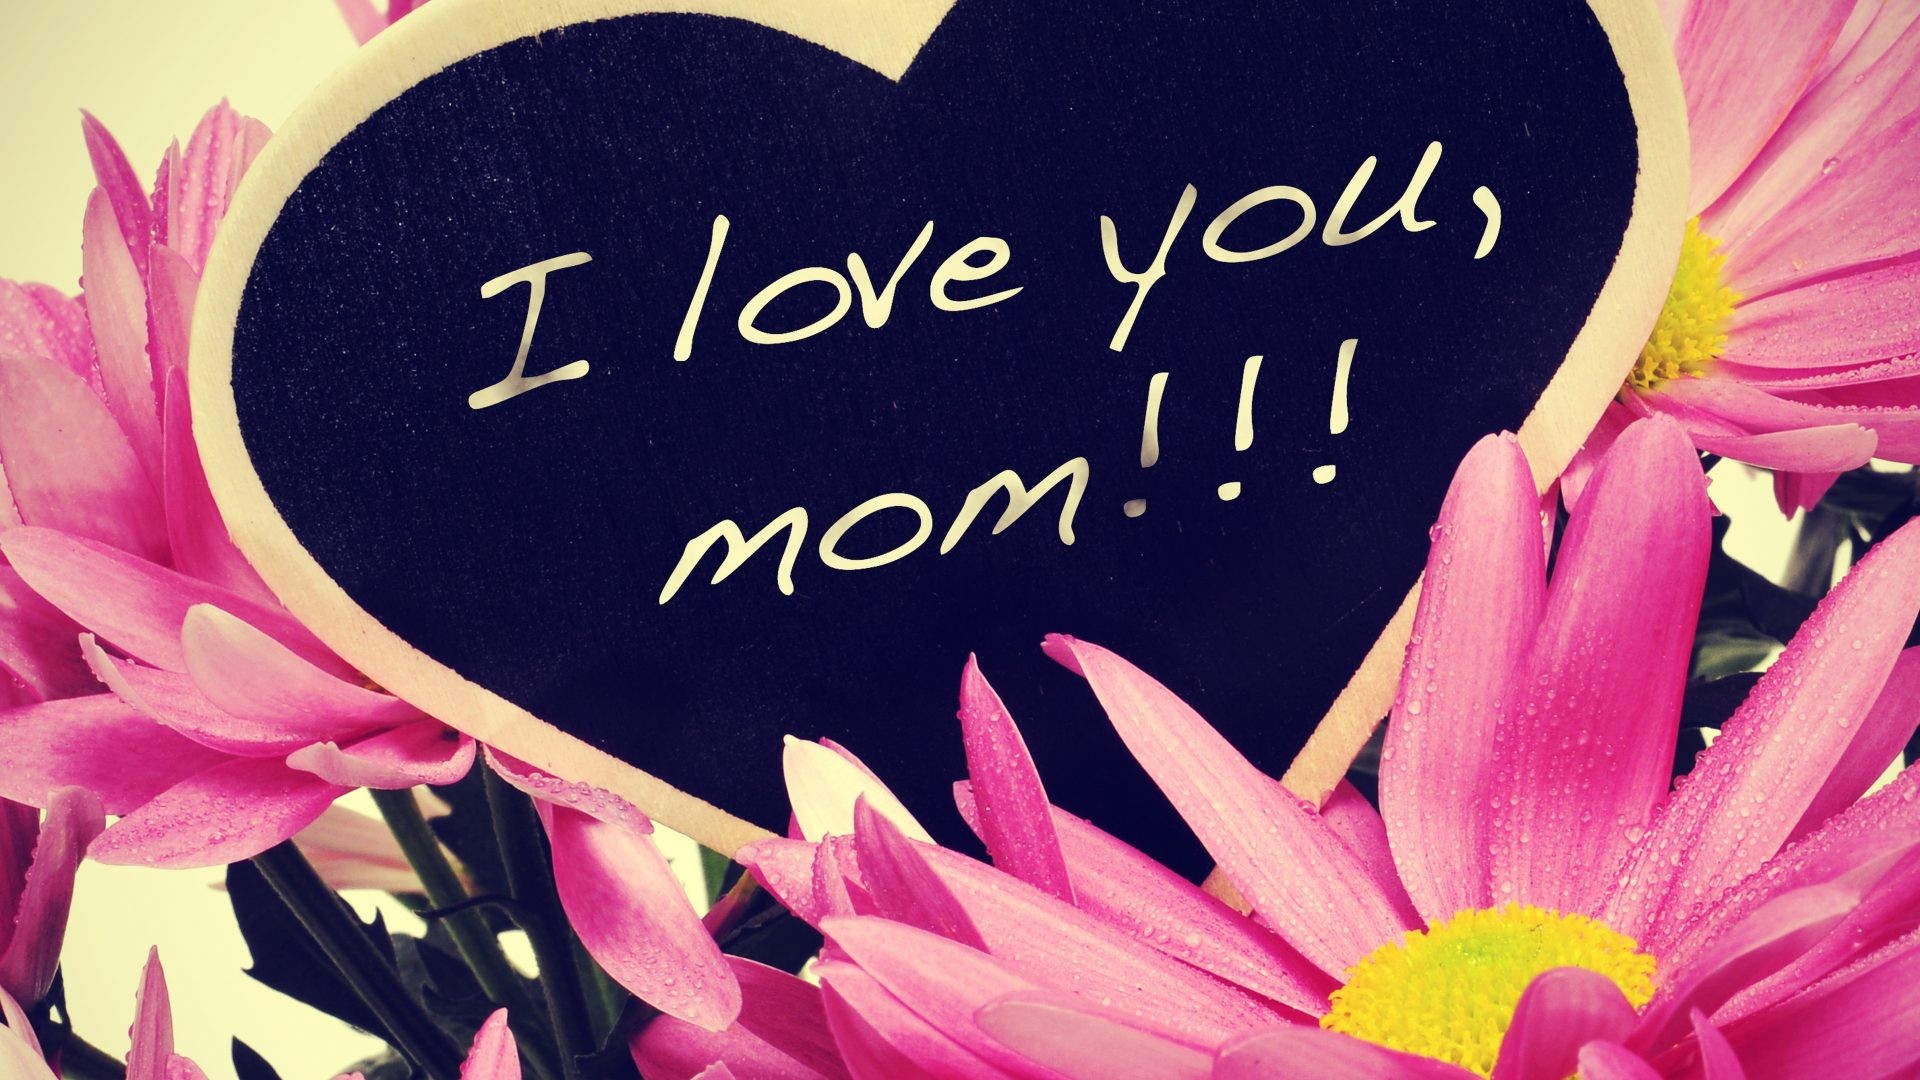 Mom Tag – Daisy Daisies Flowers Mom Nature Love Flower Wallpaper For Iphone 5c for HD